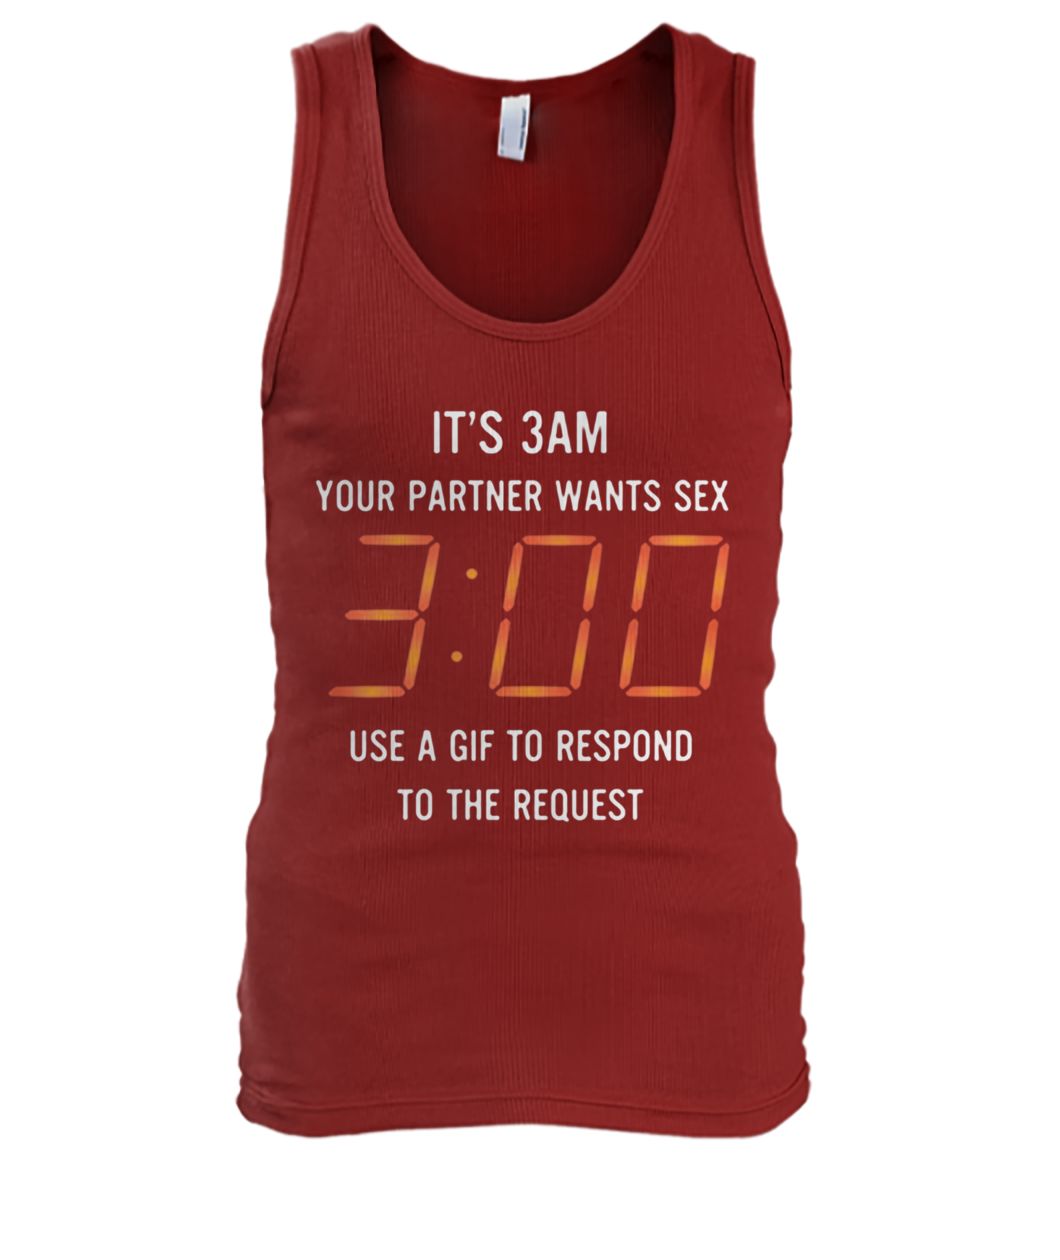 It’s 3am your partner wants sex 3 00 use a gif to respon to the request men's tank top